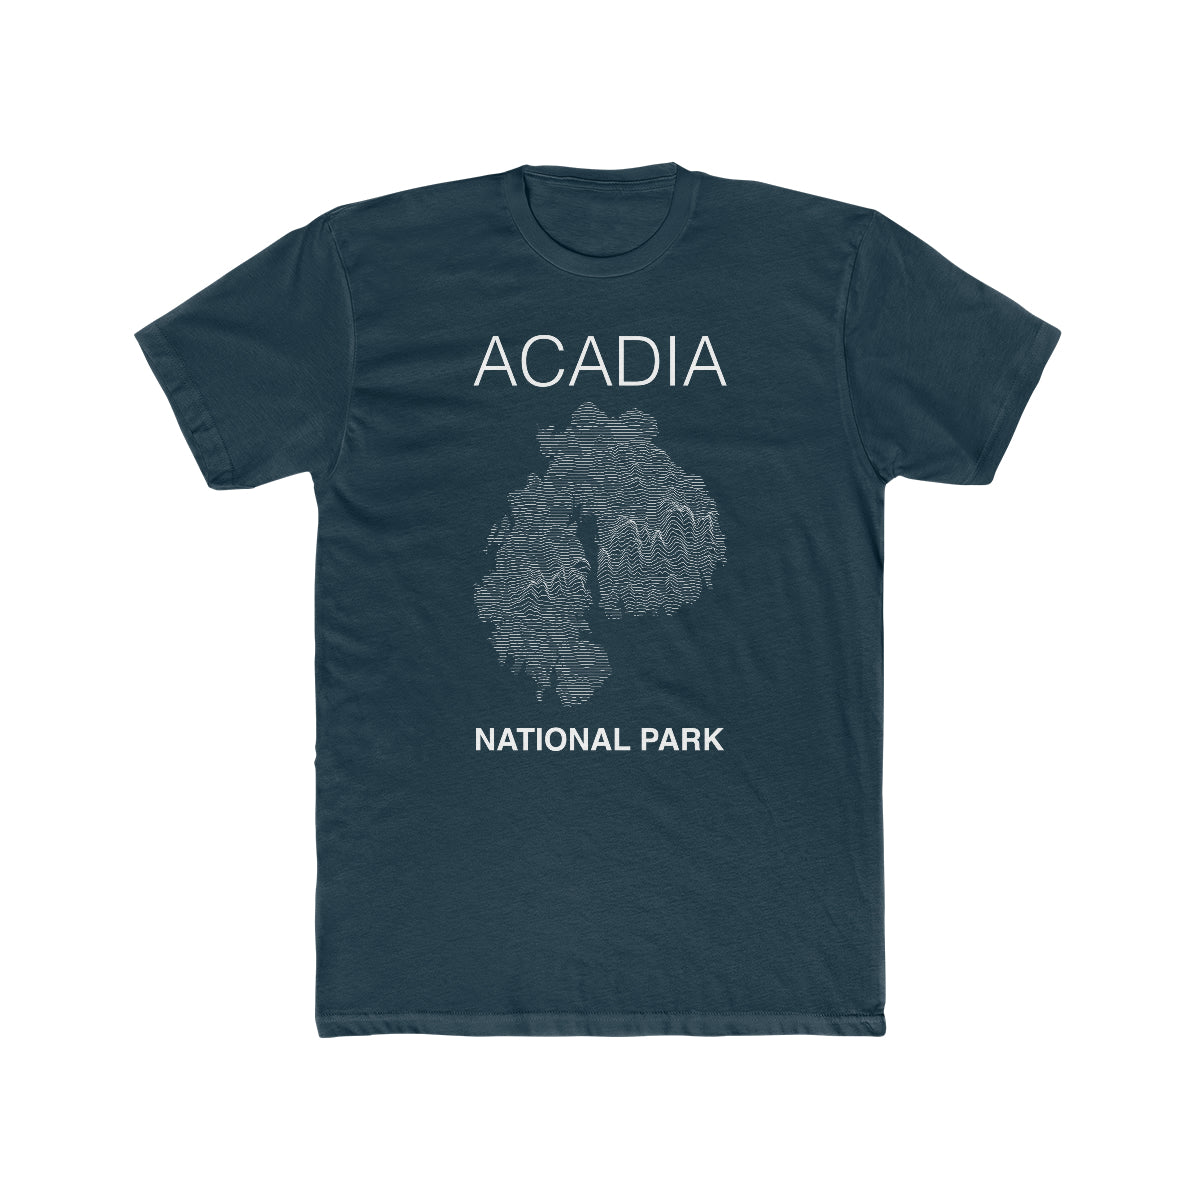 Mount Desert Island and Acadia National Park T-Shirt Lines